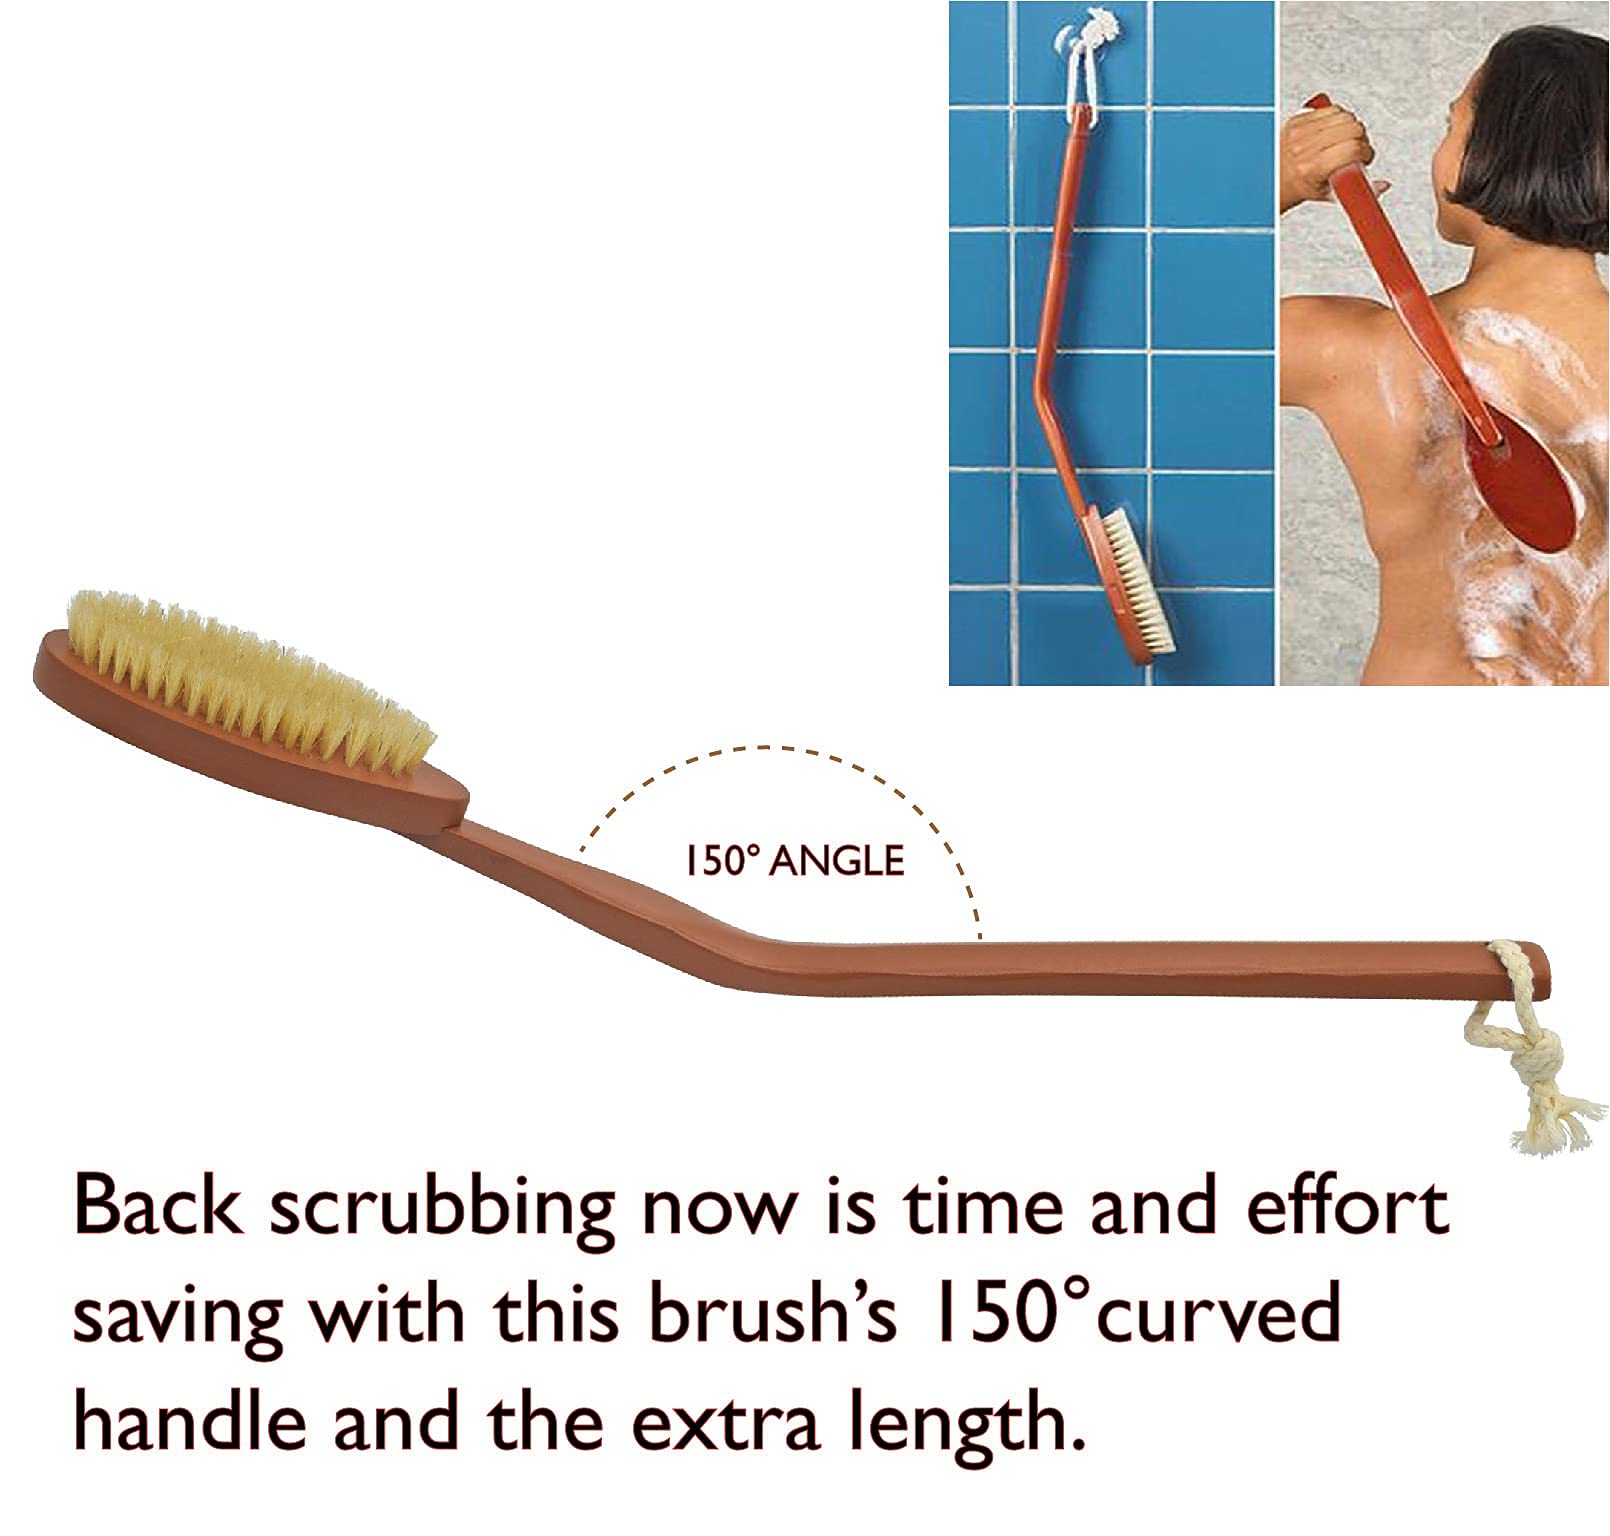 UTRAX 20'' Long Detachable Wooden Bath Brush with Curved Reach Handle Hanging Wood Shower Brush with Boar-Bristle